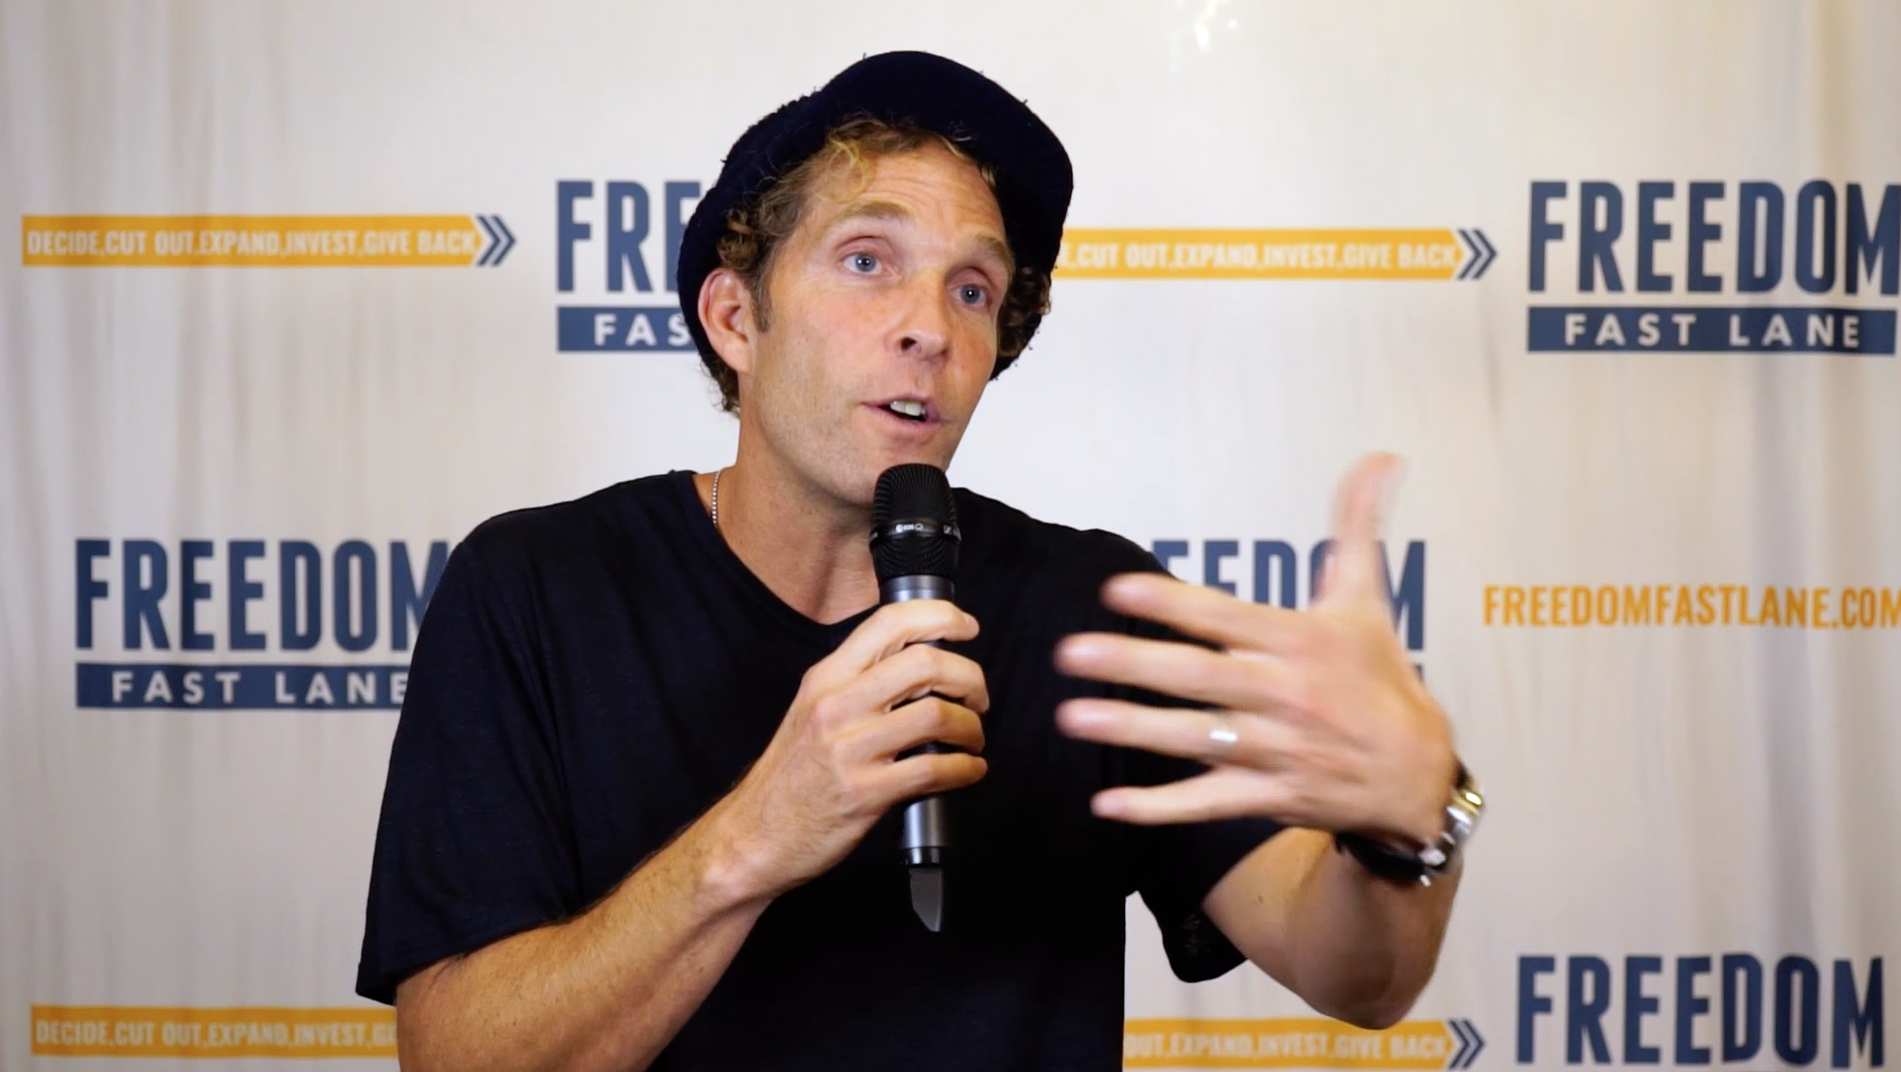 How Crushing Limiting Beliefs Unlocks Unlimited Growth Potential with Jesse  Itzler - Capitalism